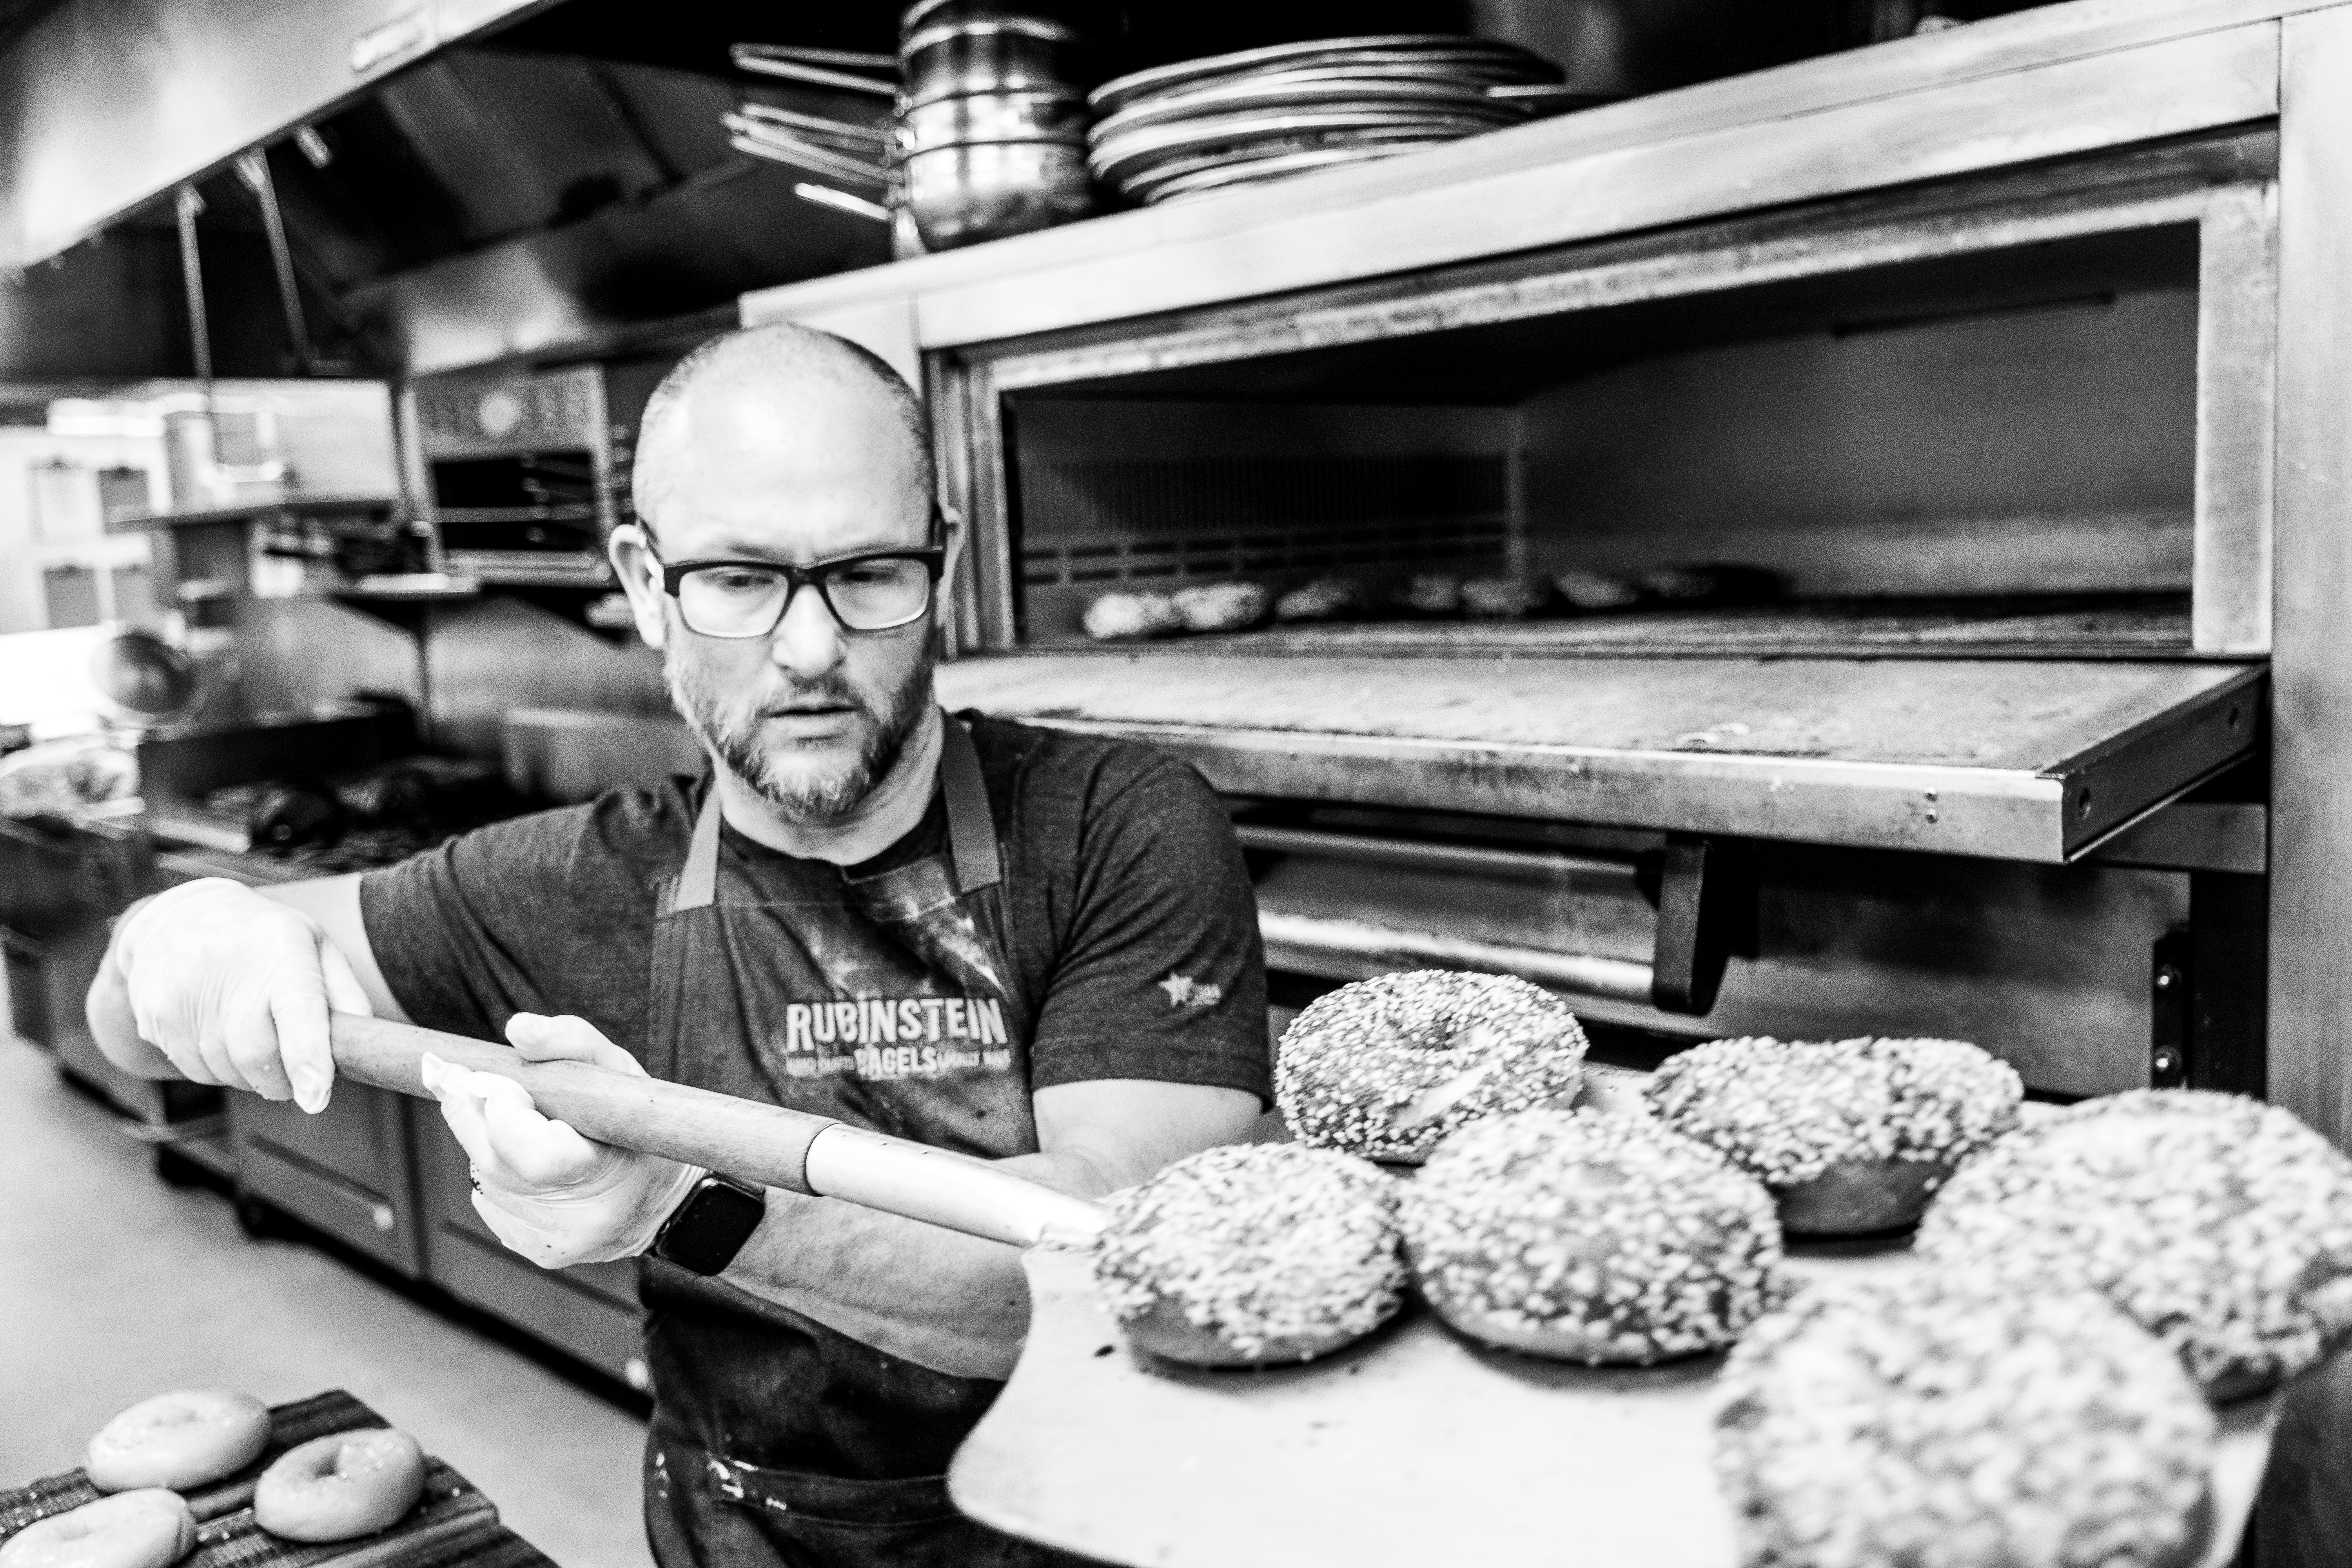 Bagel maker Andrew Rubinstein taking bagels out of the oven